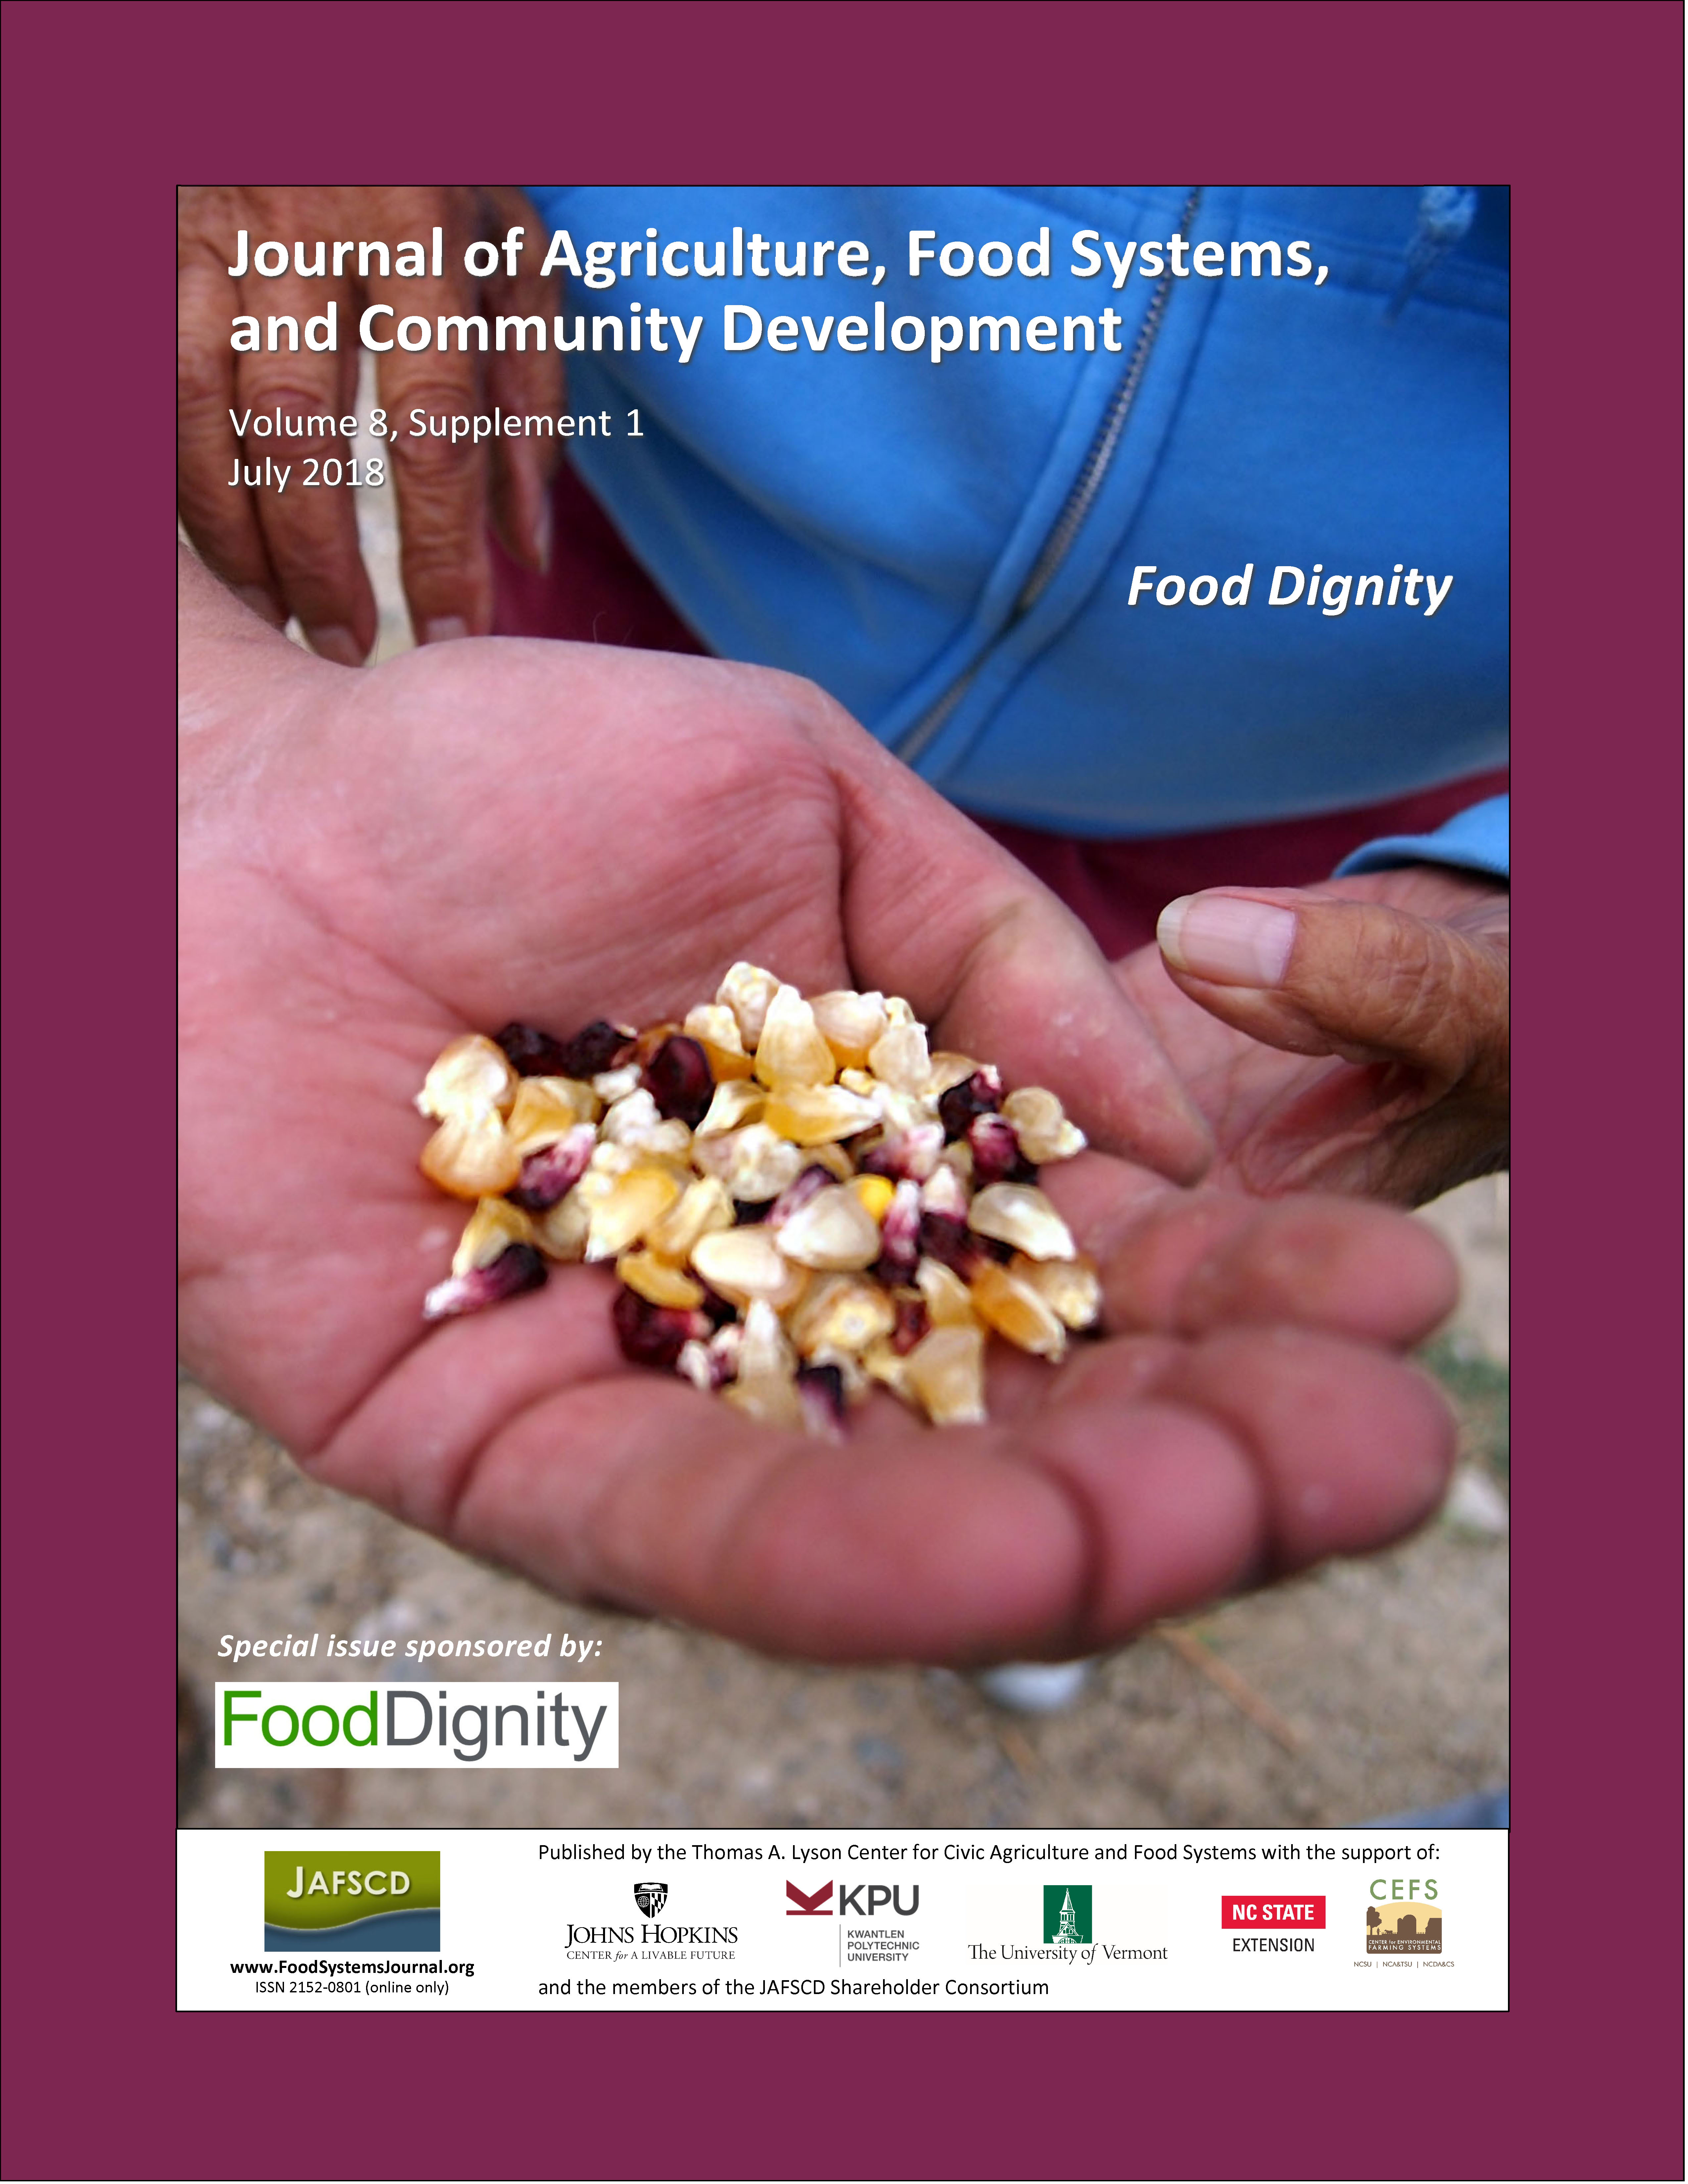 Cover of special issue on Food Dignity, with people holding heritage corn kernels